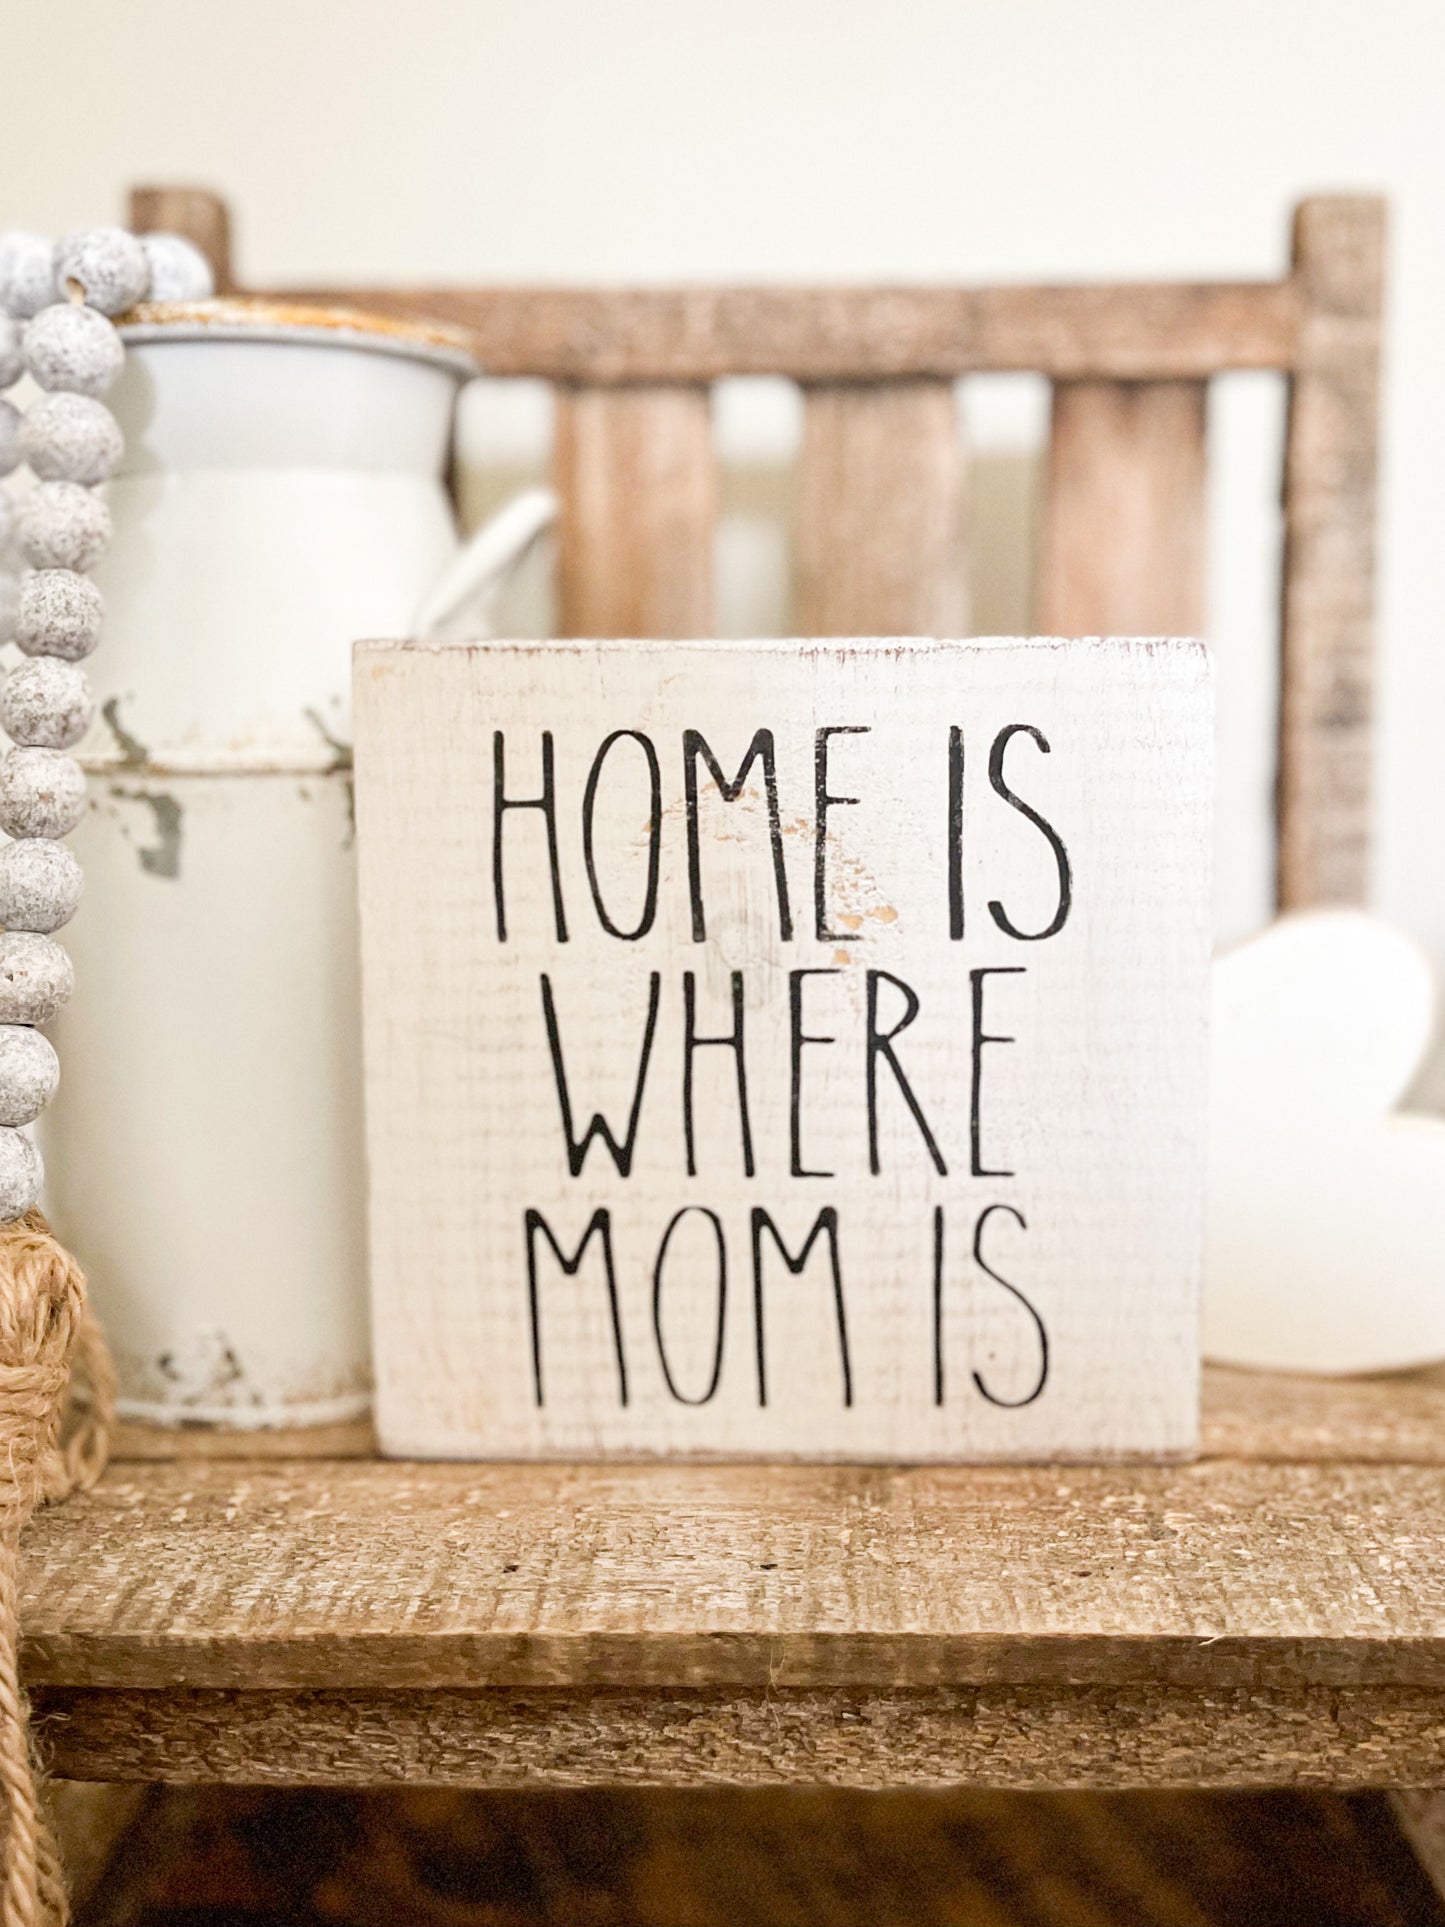 Home is where mom is sign